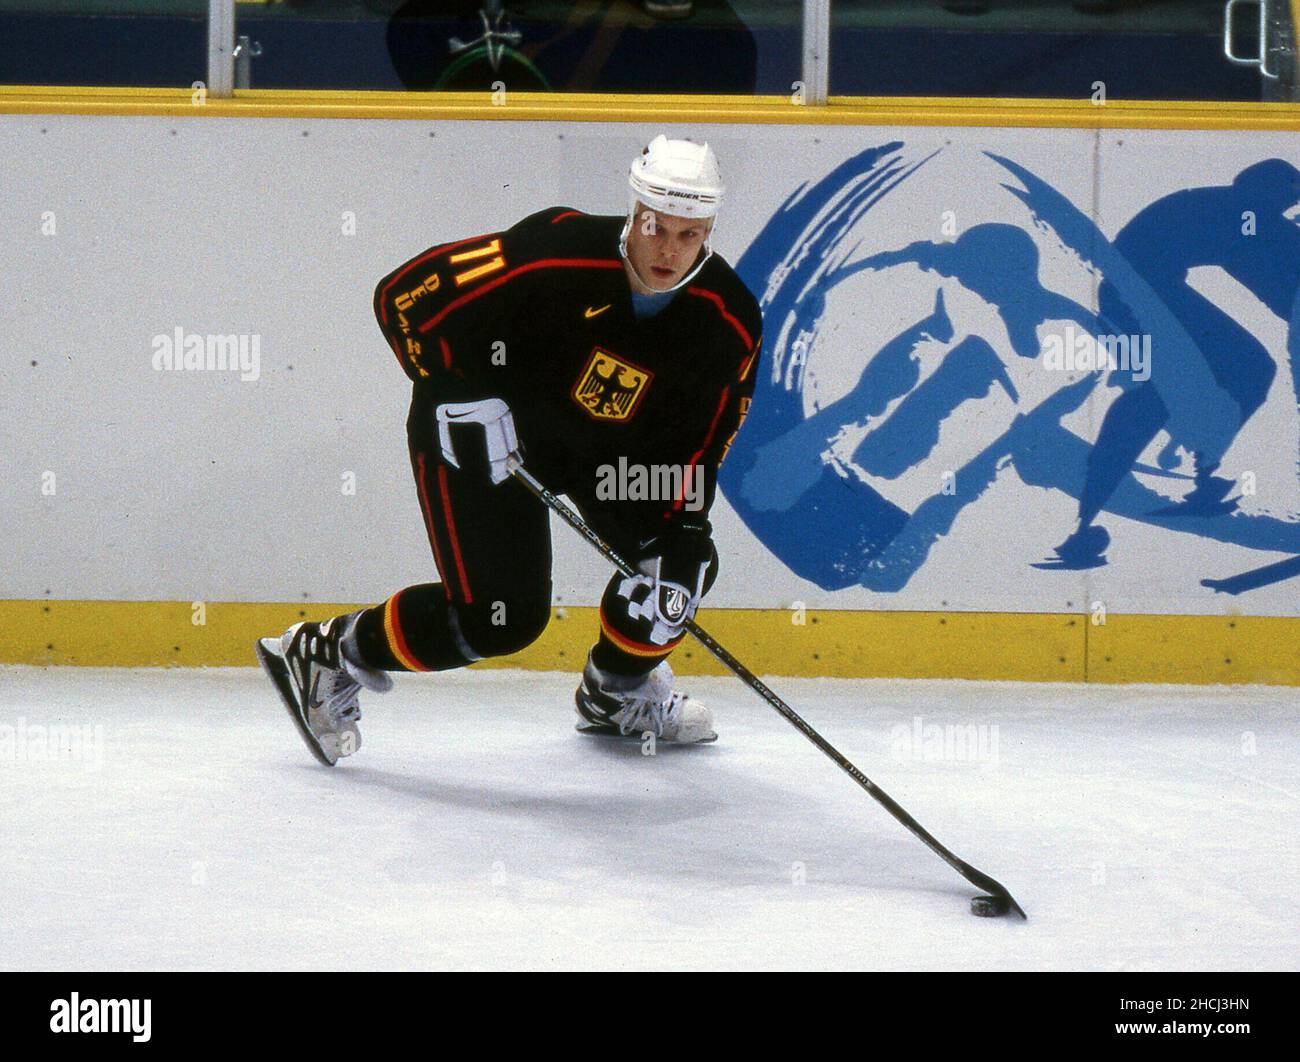 Nagano, Japon.29th décembre 2021. Firo: Sport, hiver Sport Olympia, Olympiade, 1998 Nagano,Japon, Jeux Olympiques d'hiver, 98, images d'archives hockey sur glace, MV§nner, Men Germany - Japan 3: 1 Stefan Ustorf, Individual action Credit: dpa/Alay Live News Banque D'Images